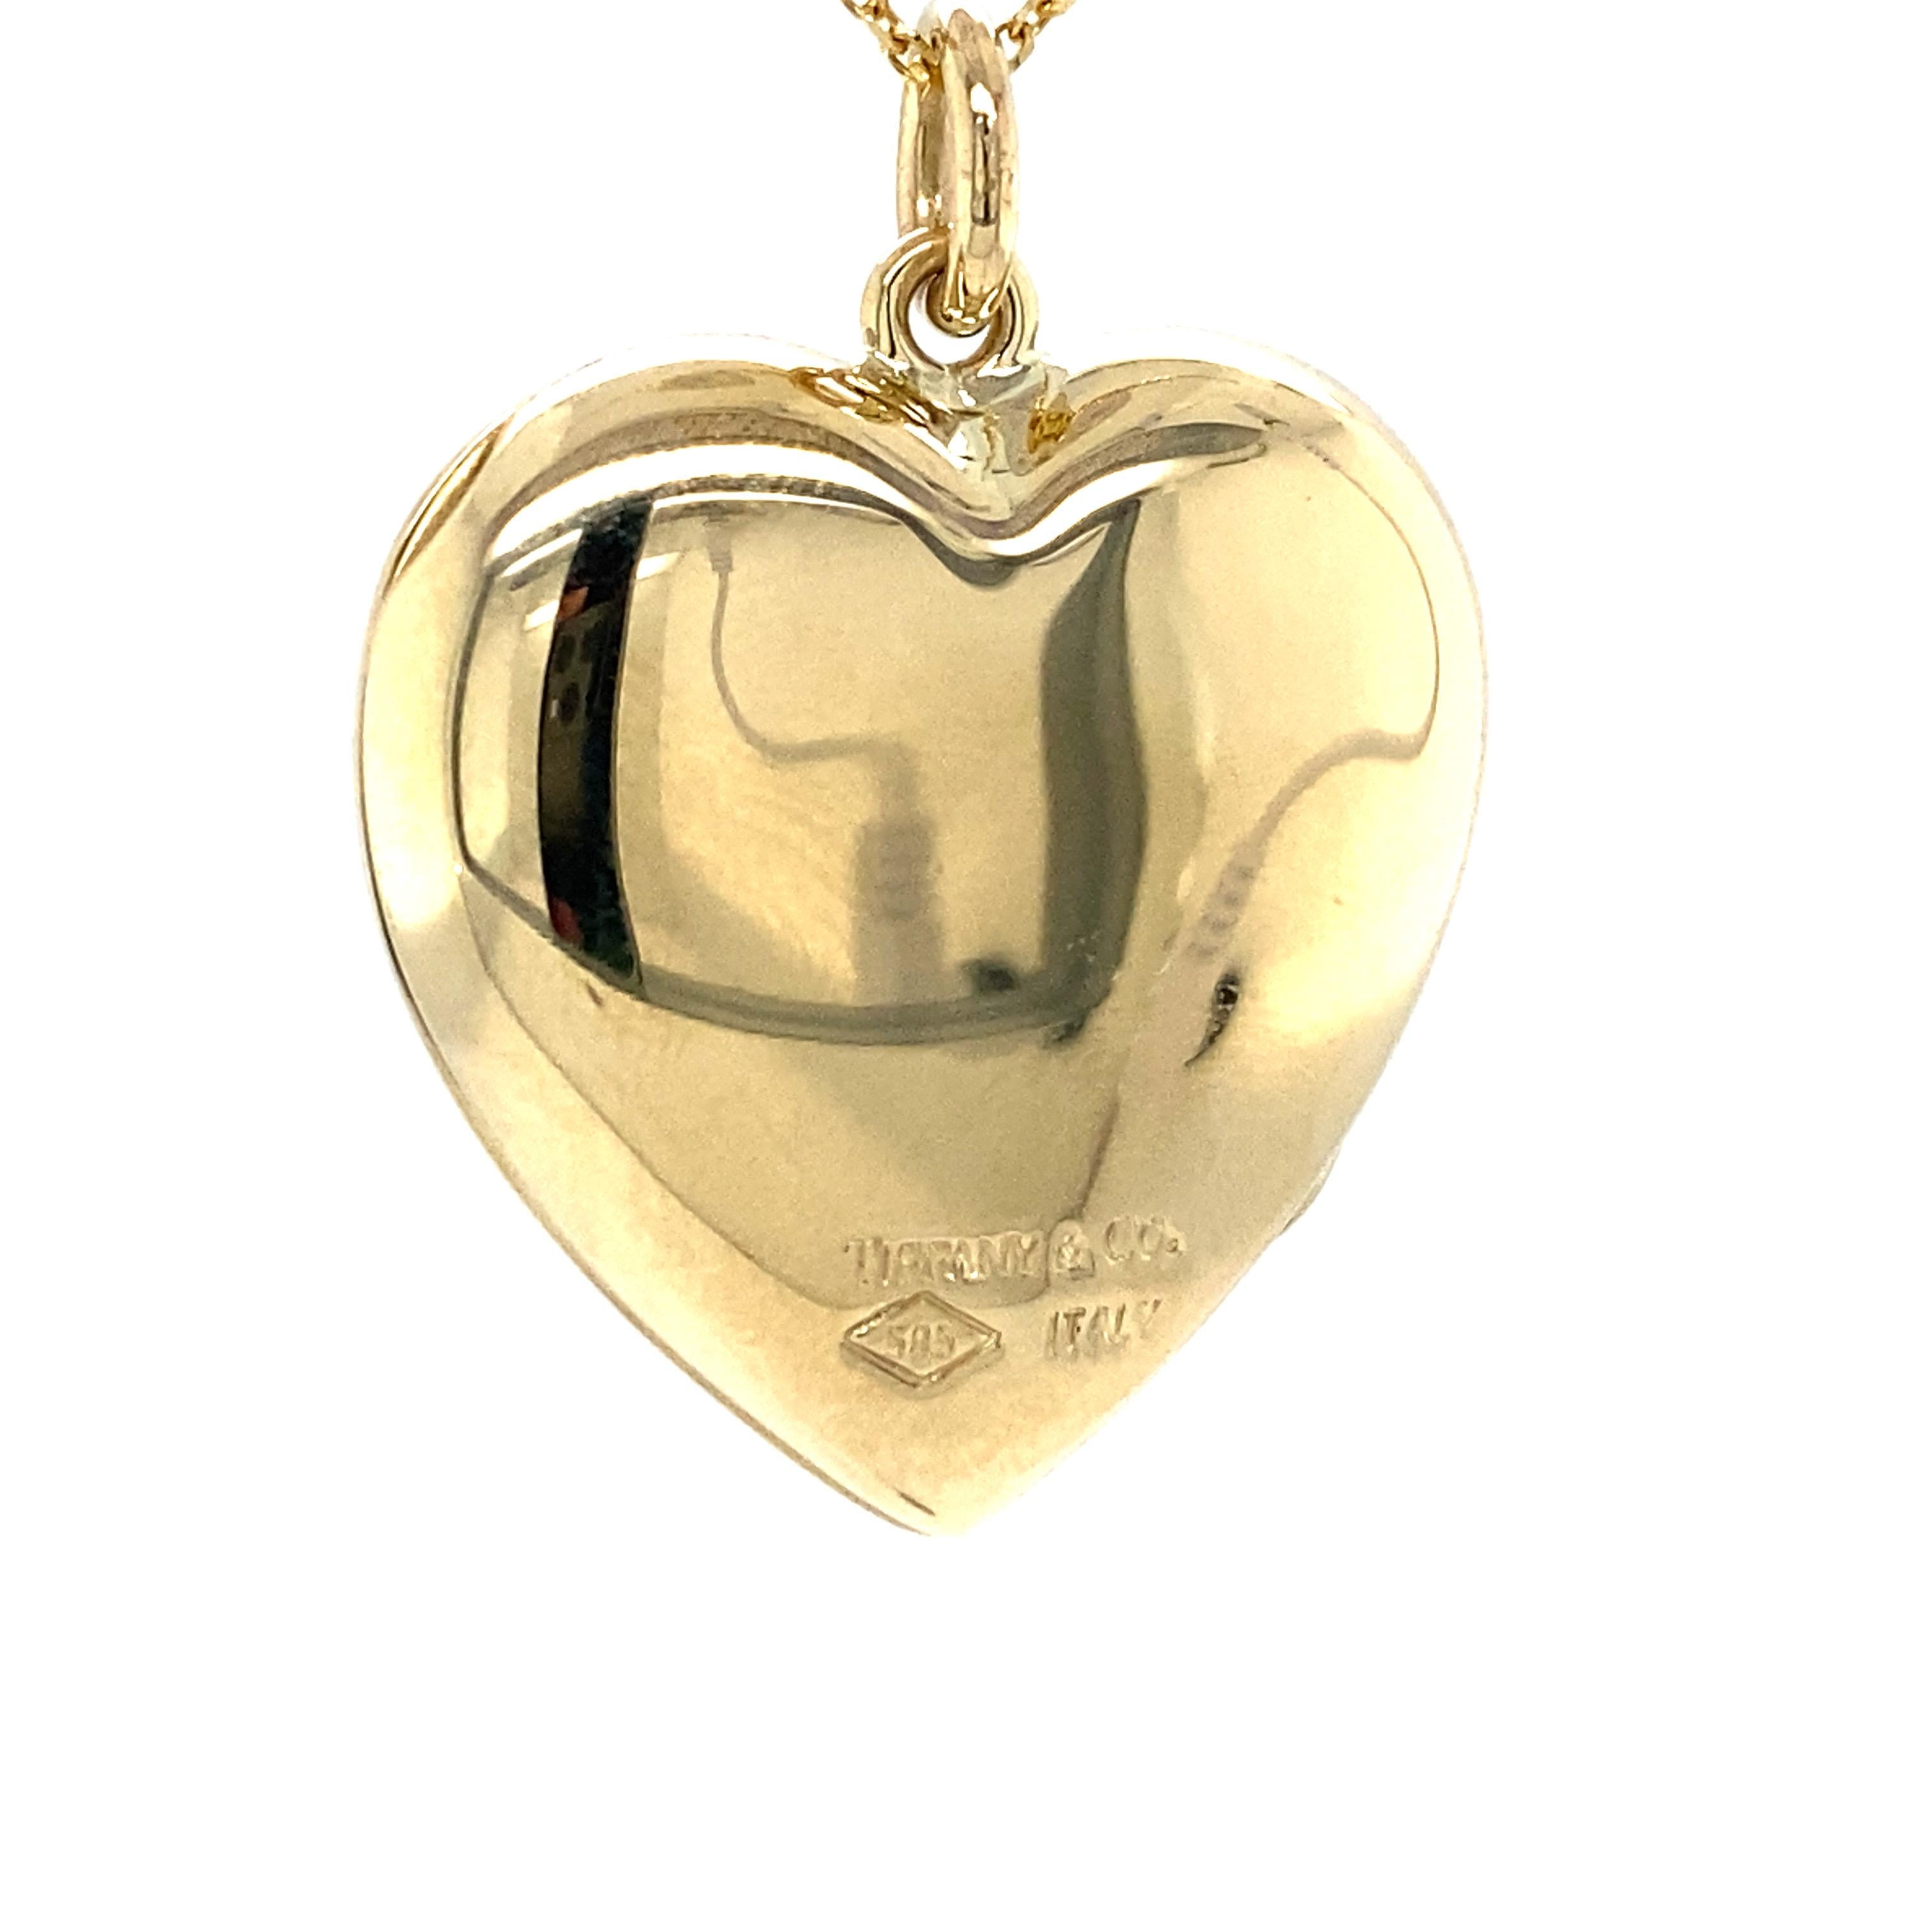 Tiffany & Co Heart Shape Locket in 14K Yellow Gold.  The locket measures 1 1/4 inch in length and 1 1/8 inch in width. 10.10 grams.  Signed.  Chain not included. T & Co. felt bag and blue box included.